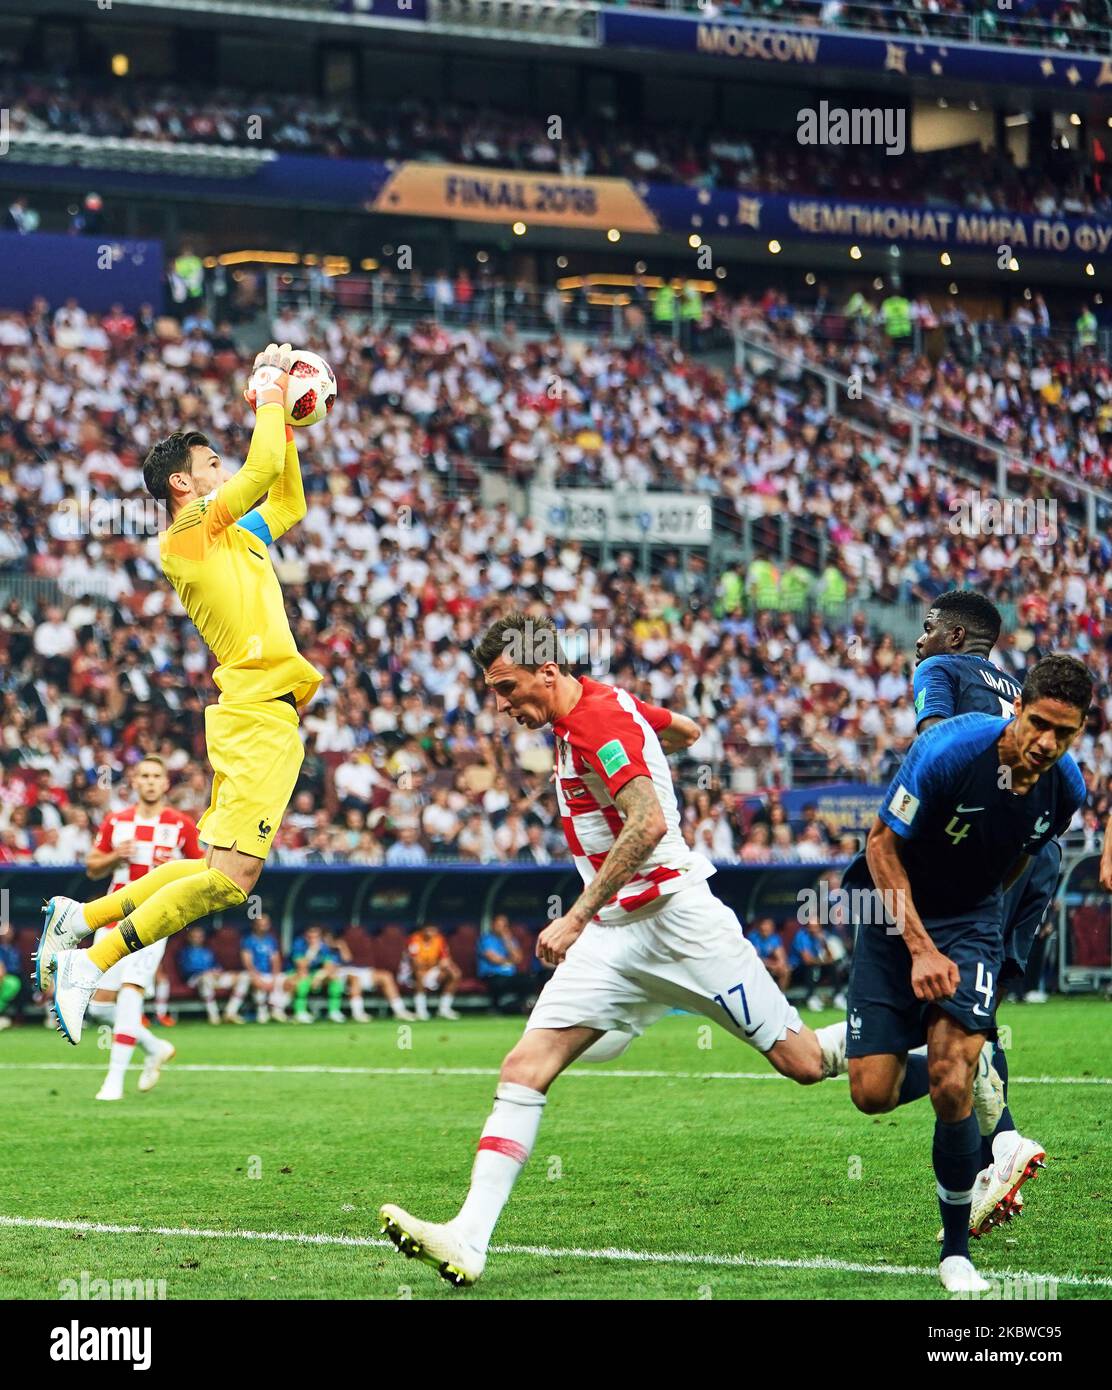 Hugo Lloris of France catching the ball just in front of Mario Mandzukic of Croatia during the FIFA World Cup match France versus Croatia at Luzhniki Stadium, Moscow, Russia on July 15, 2018. (Photo by Ulrik Pedersen/NurPhoto) Stock Photo